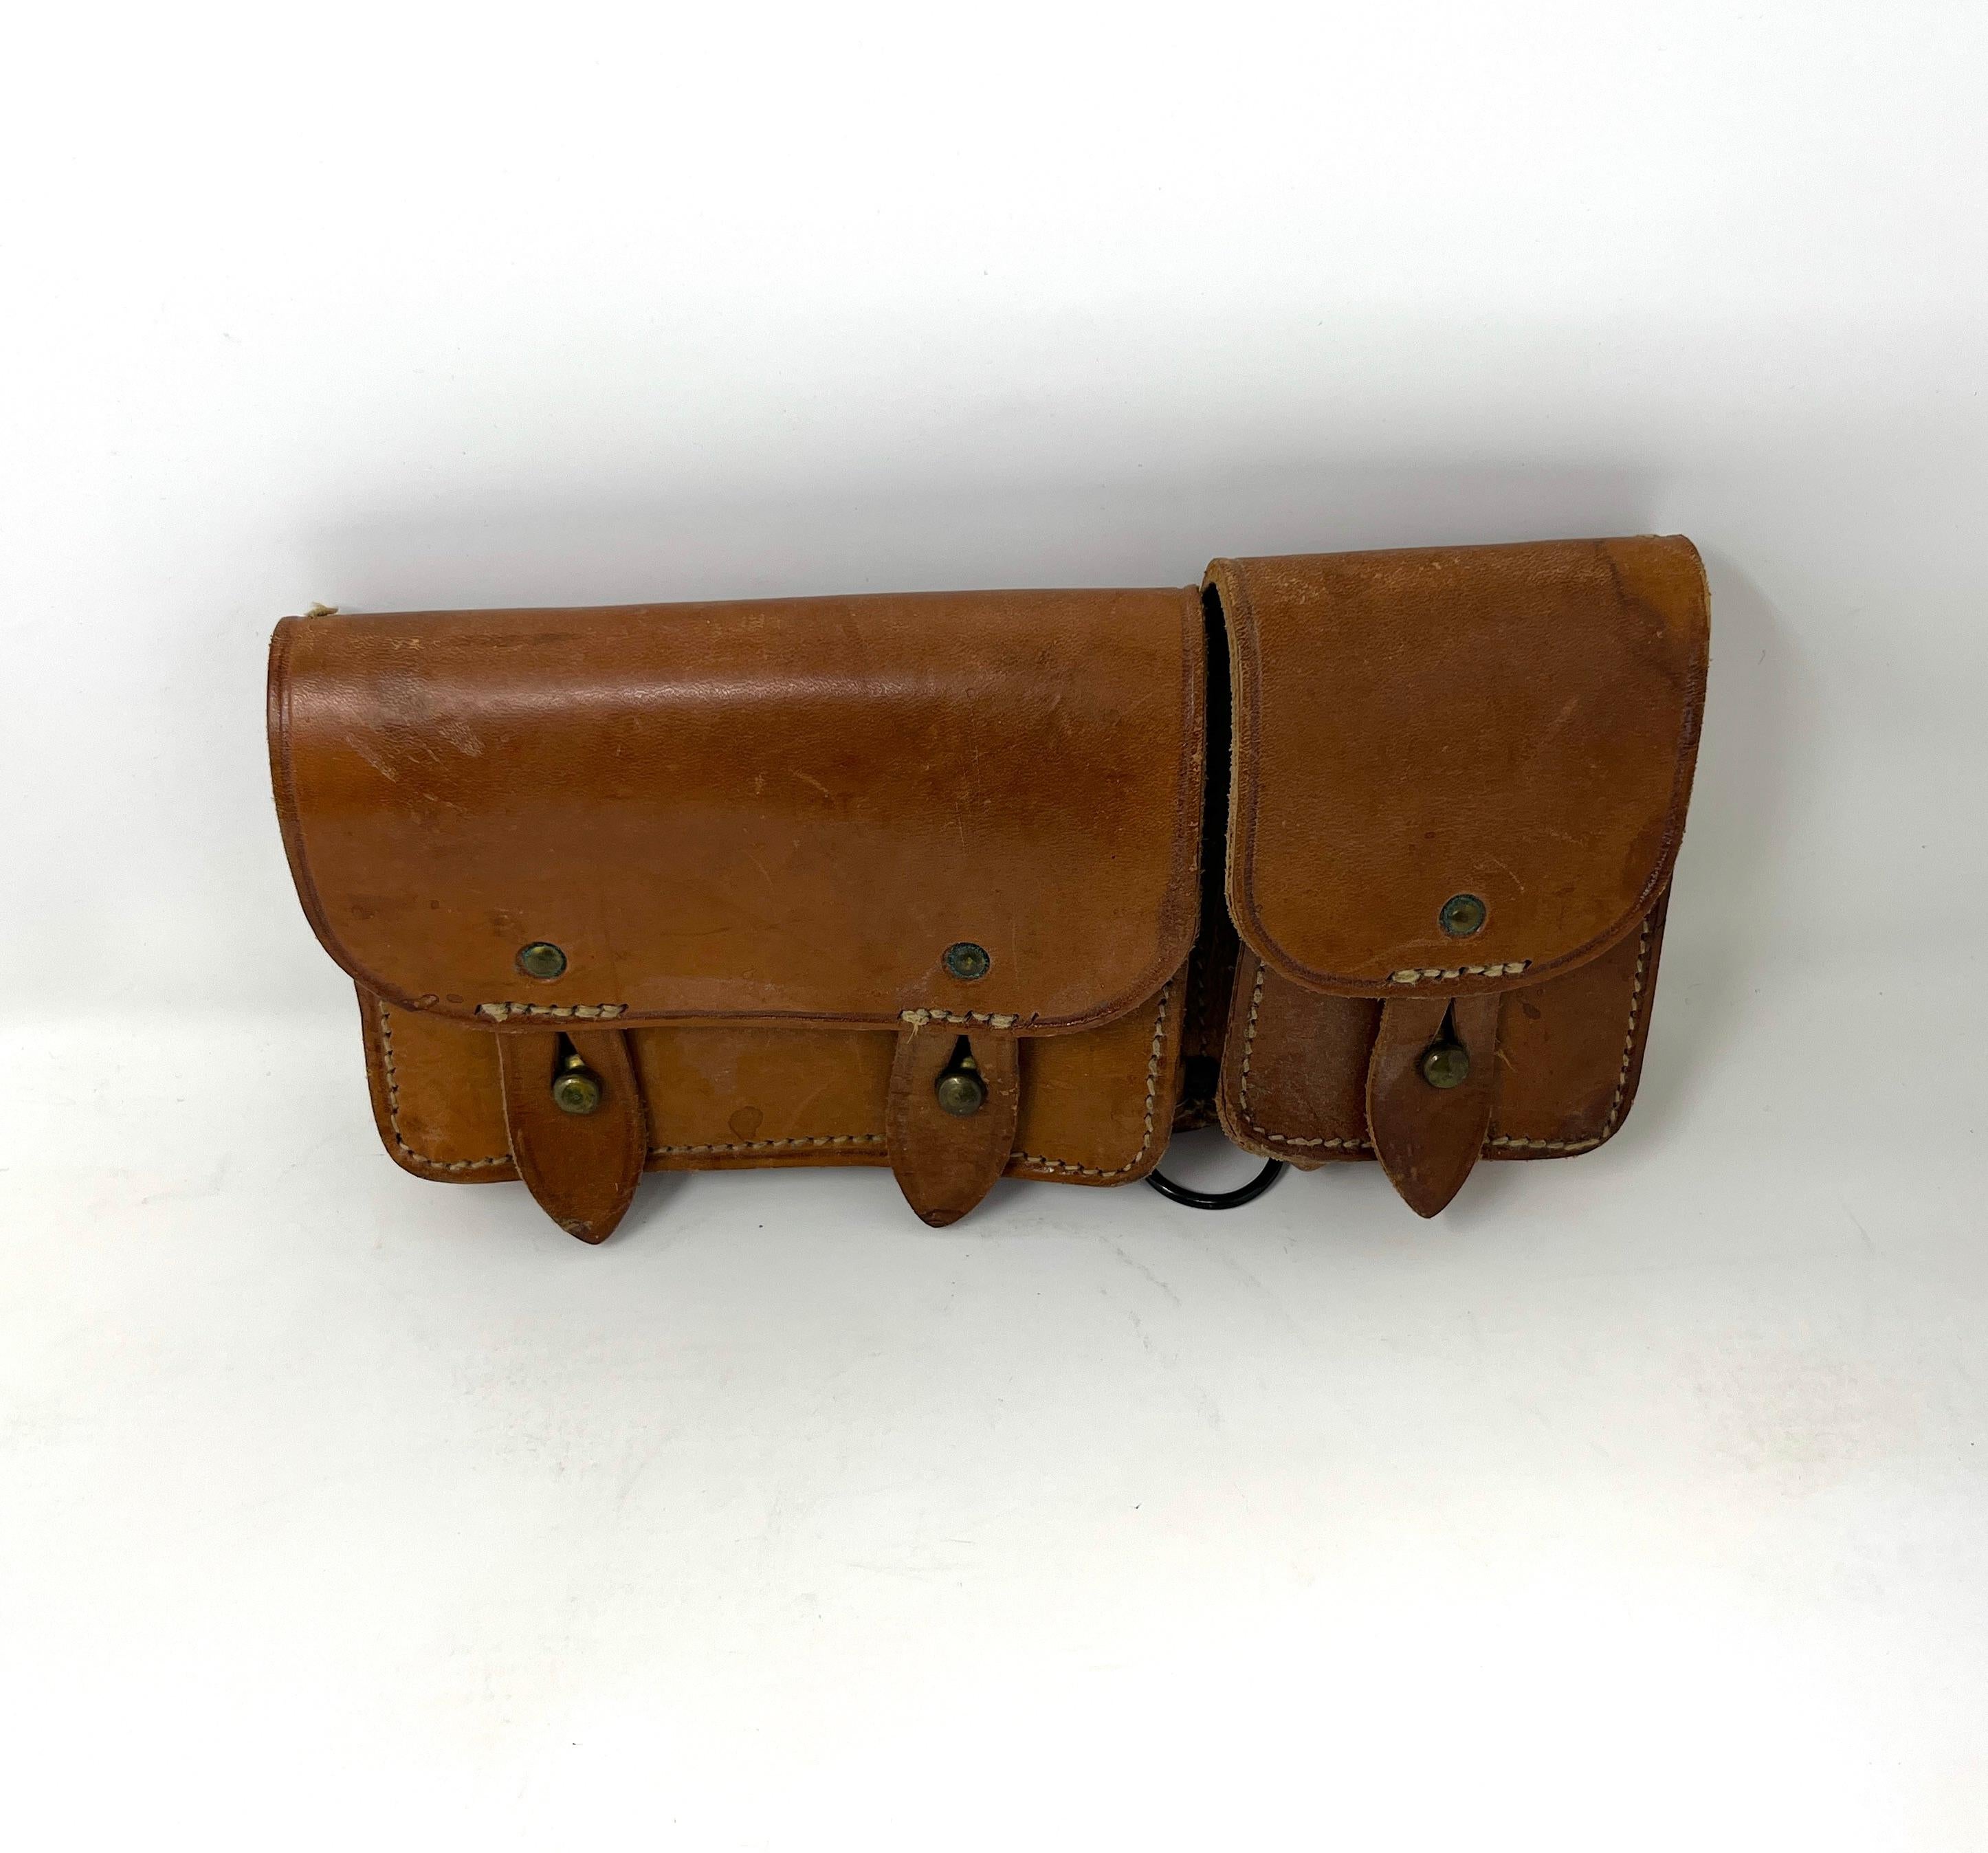 Antique early 20th century French or Swiss leather ammunition / artillery officer / military gendarmerie pouch / cartridge box. Well made, dating from the early 1930s. Made of durable and pliable heavy duty leather; saddle stitched all the way